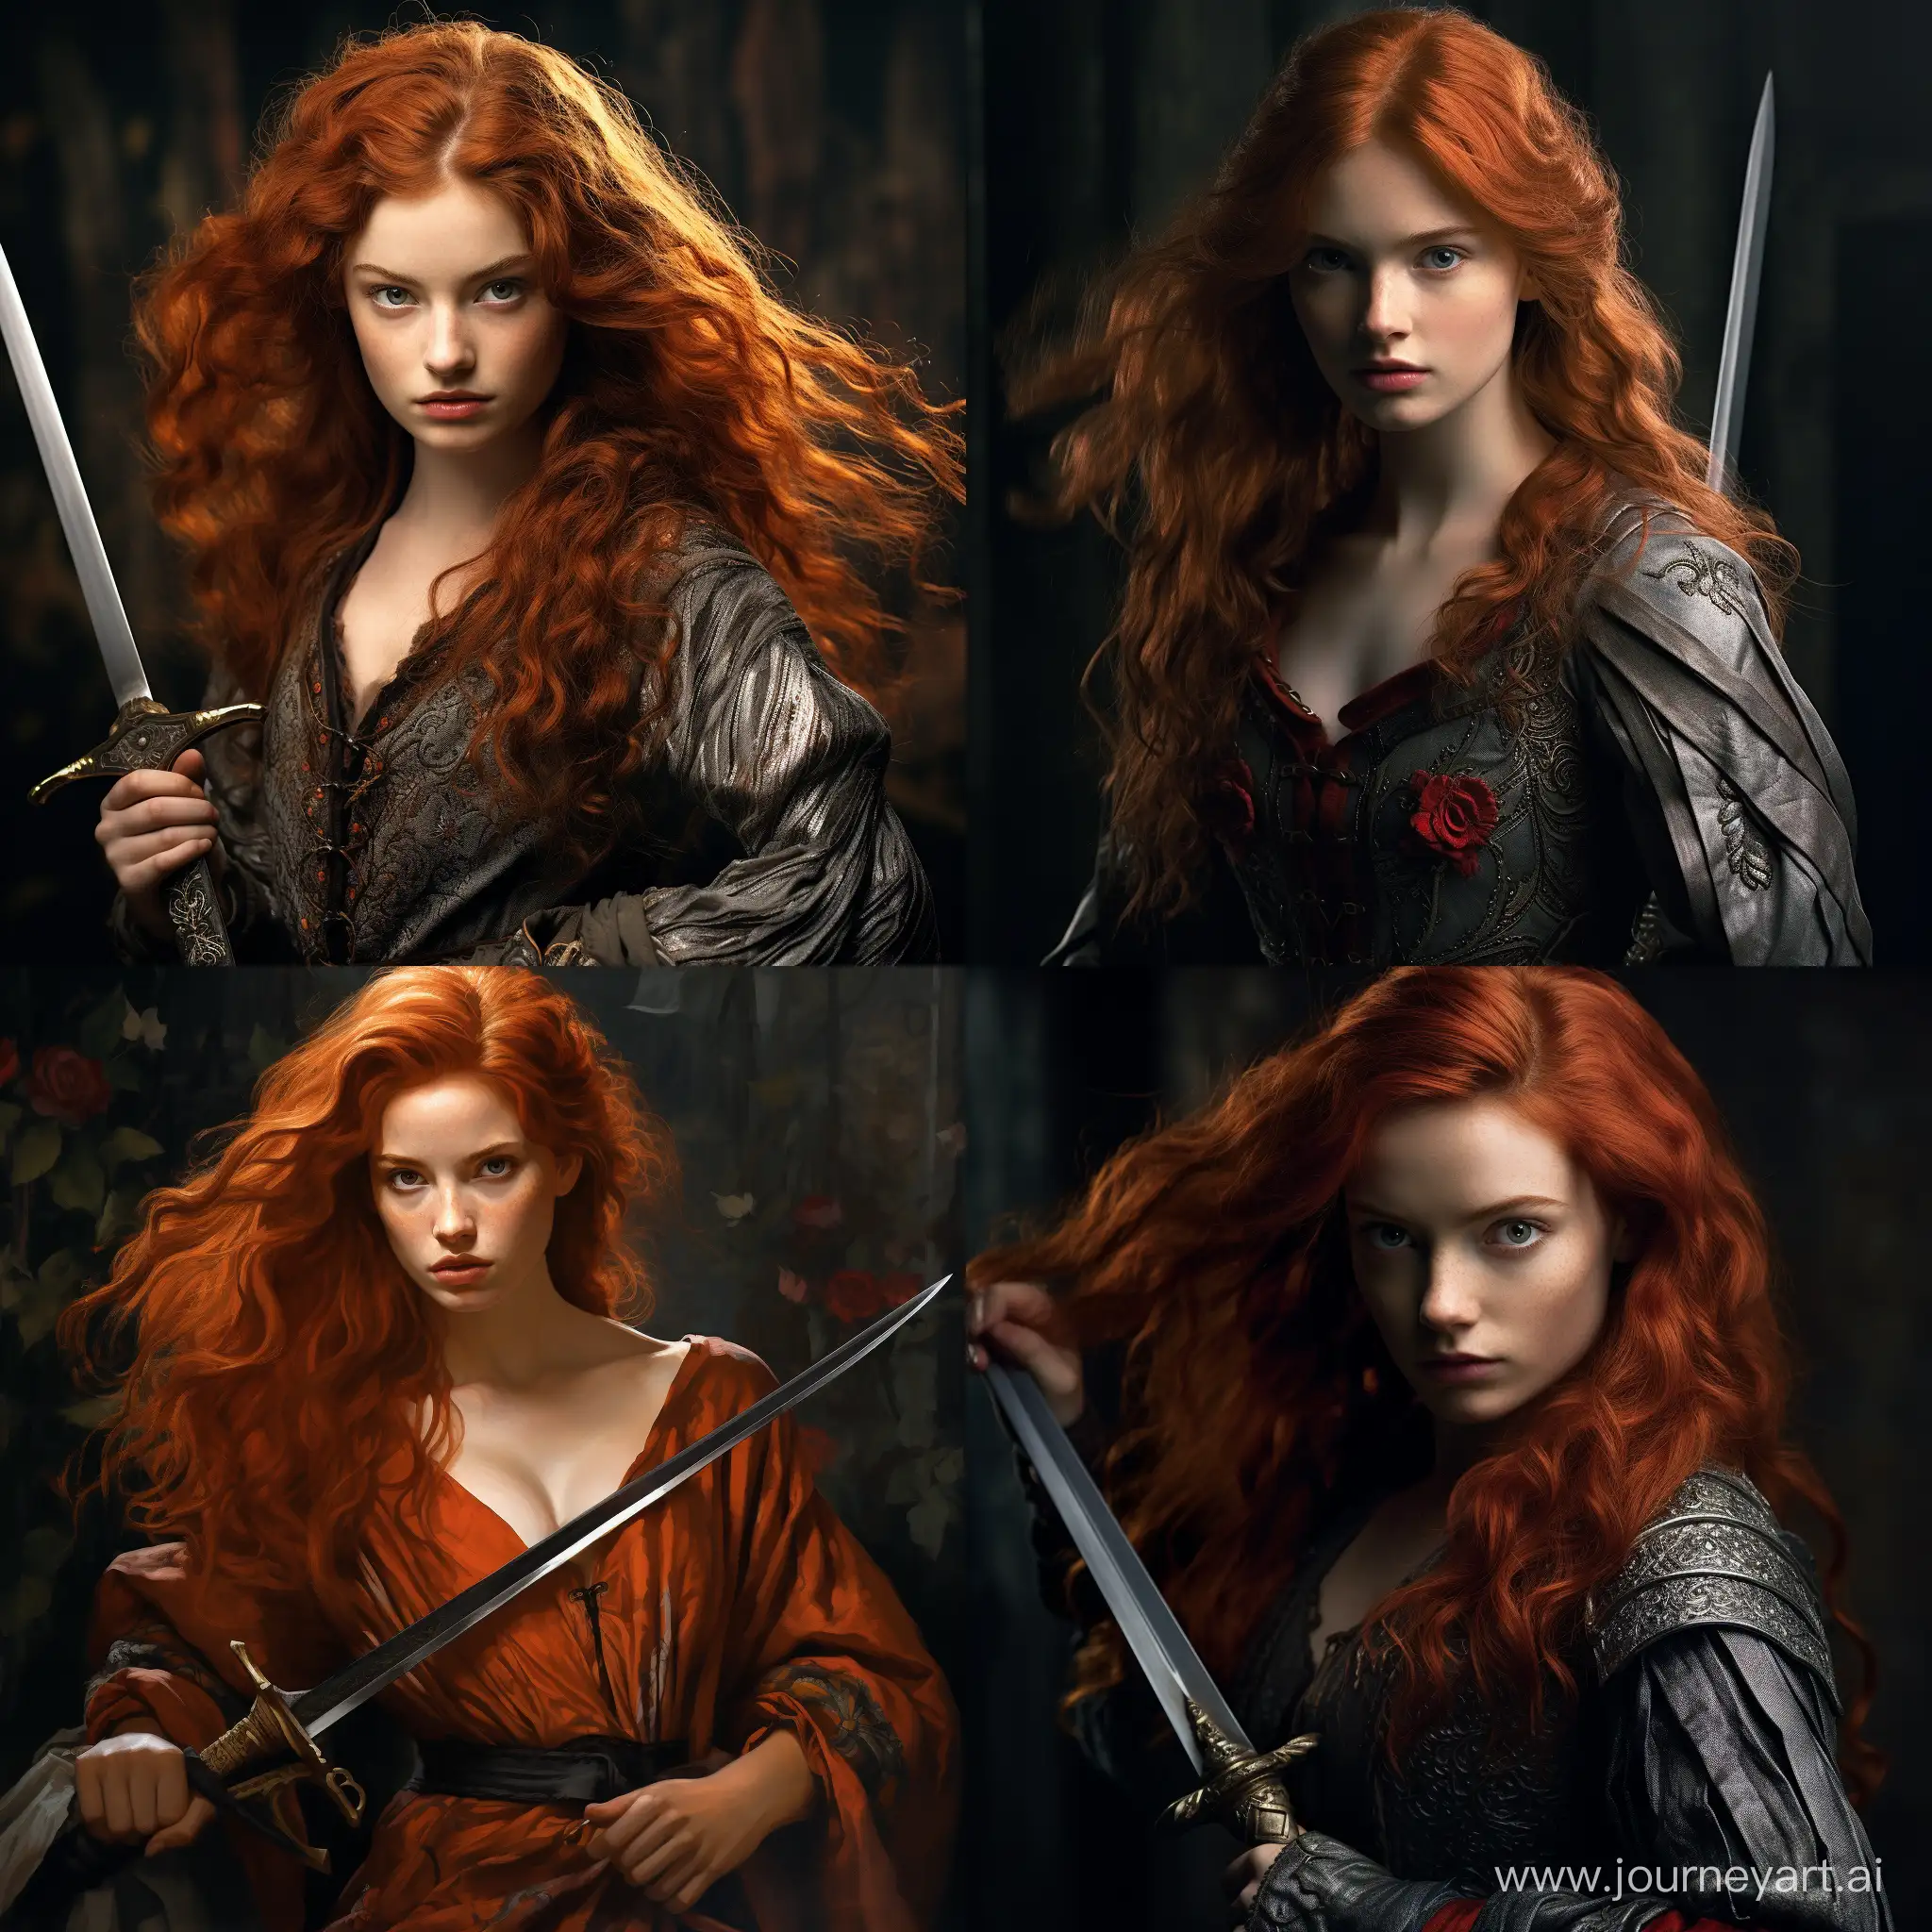 young red-haired noble woman wearing a dress and wielding a sword